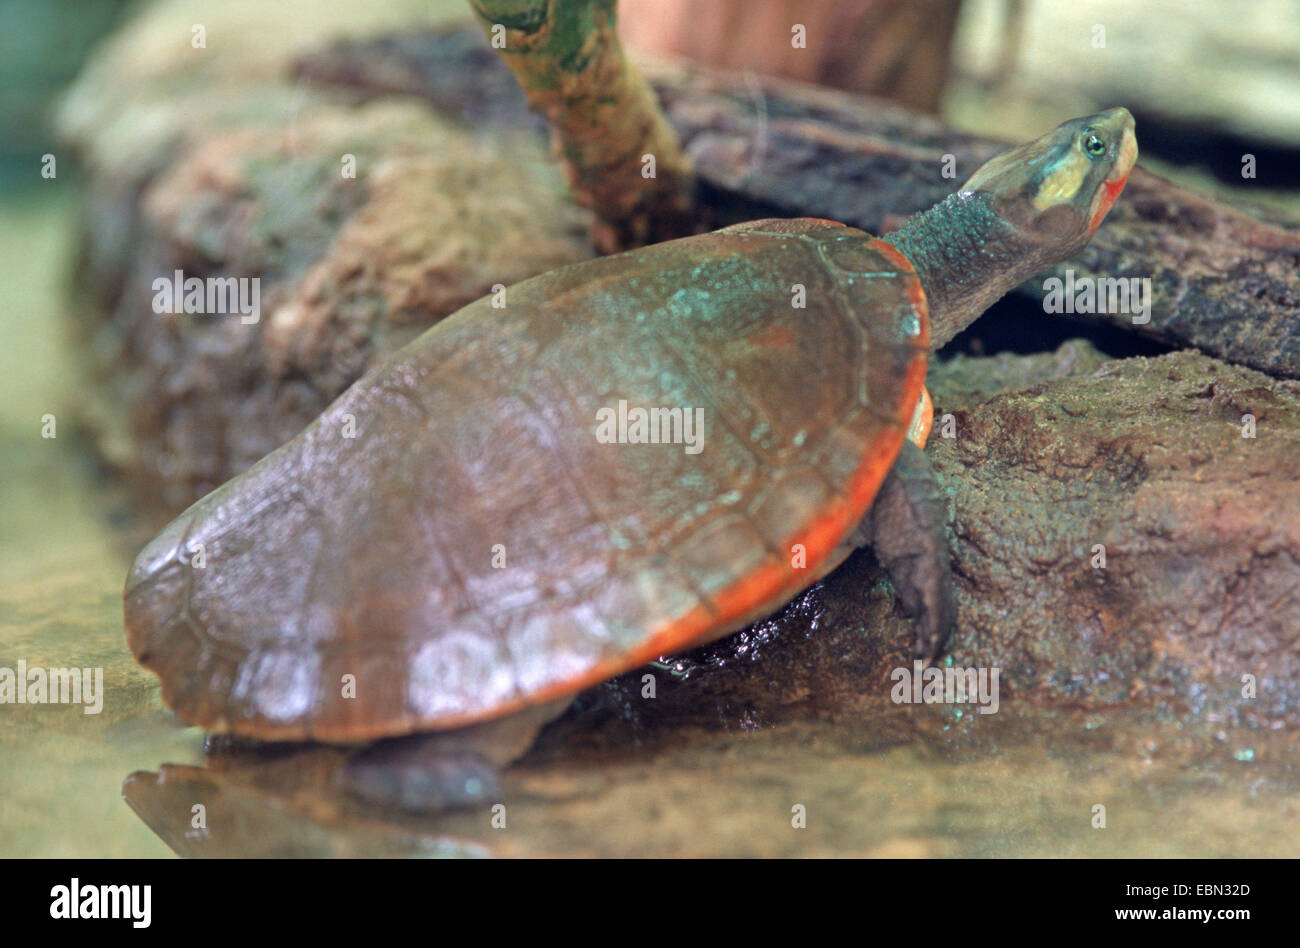 Australian big-headed side-necked turtle (Emydura australis), climbing to the shore from a shallow water Stock Photo